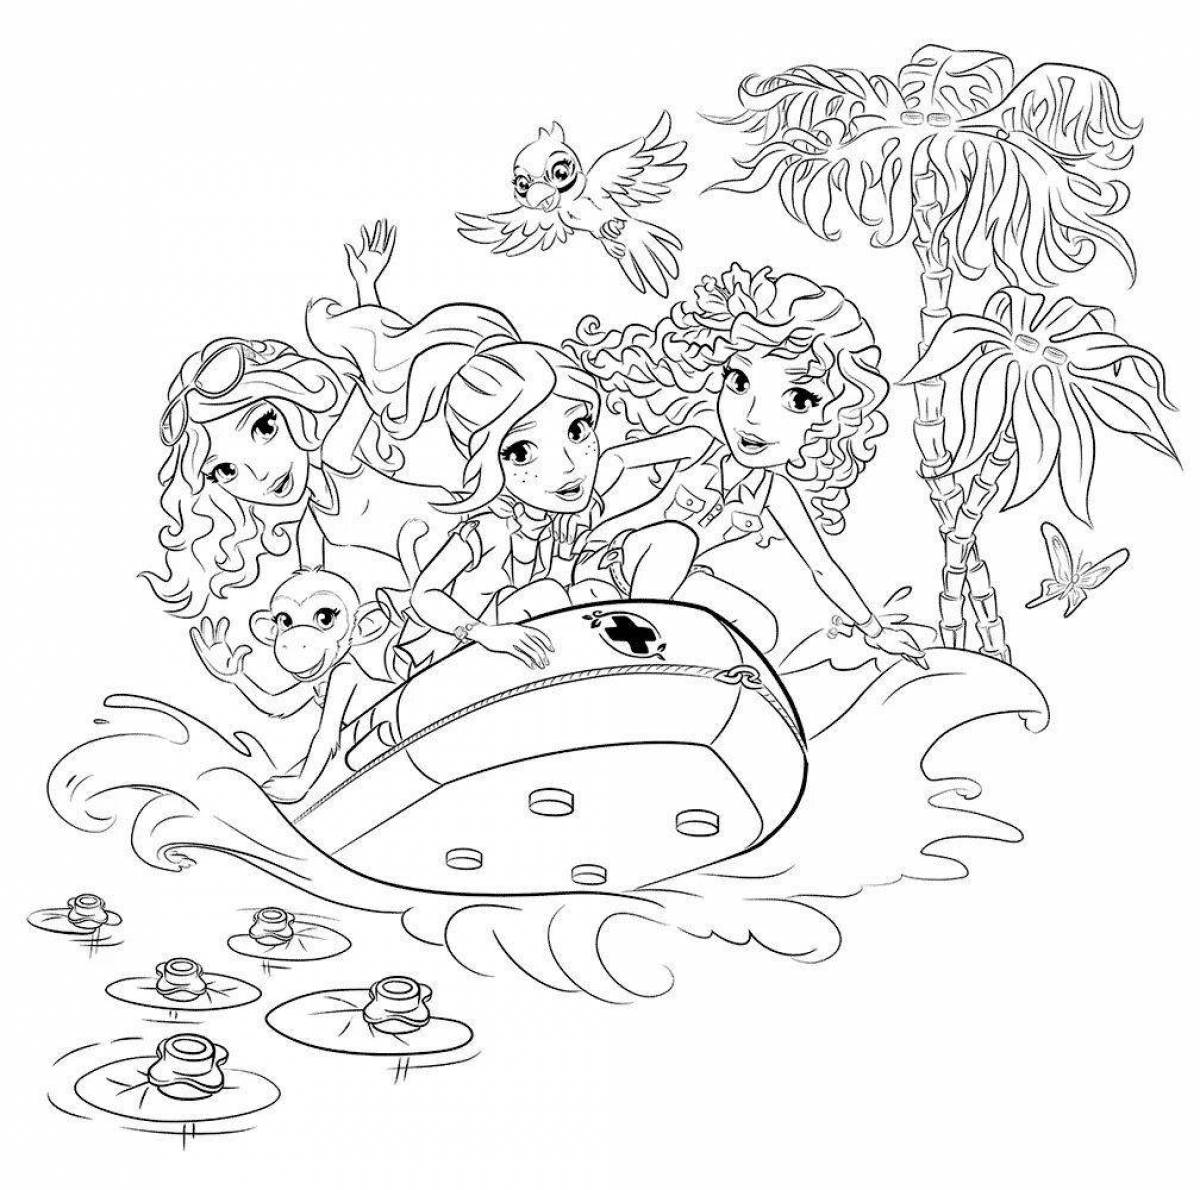 Lego friends wonderful coloring pages